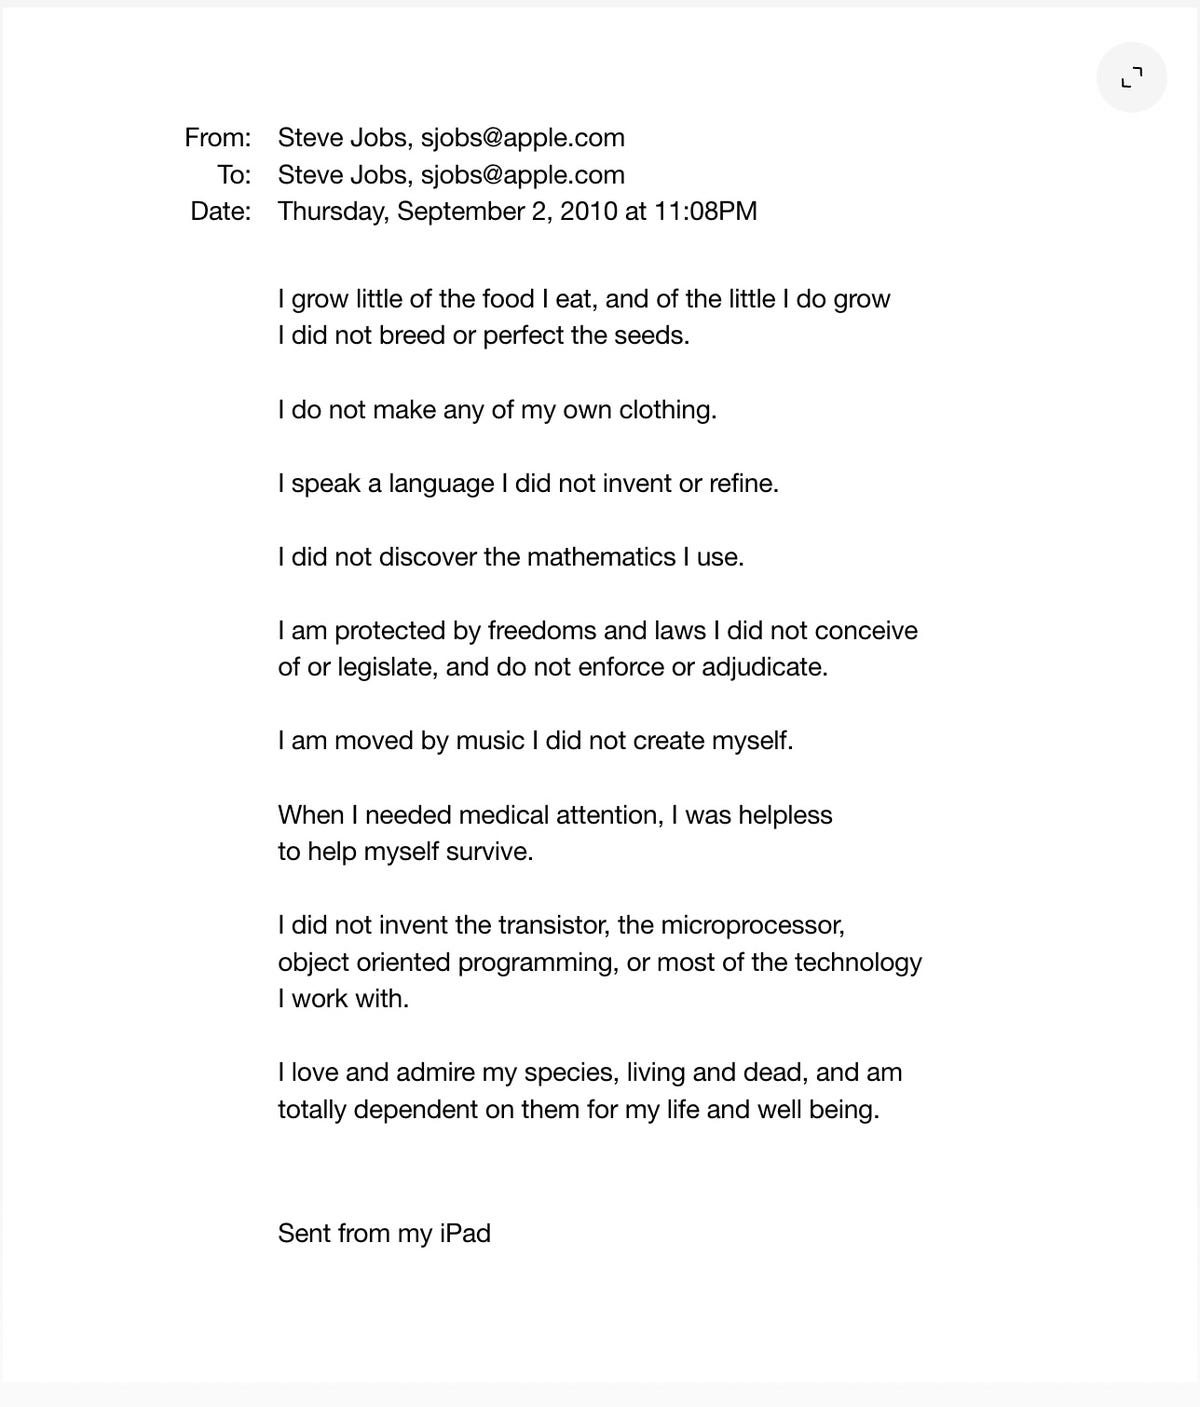 Text from an email sent by Steve Jobs in September 2010 explaining his reliance on objects, clothes, food, and medical treatment he did not himself create or invent.